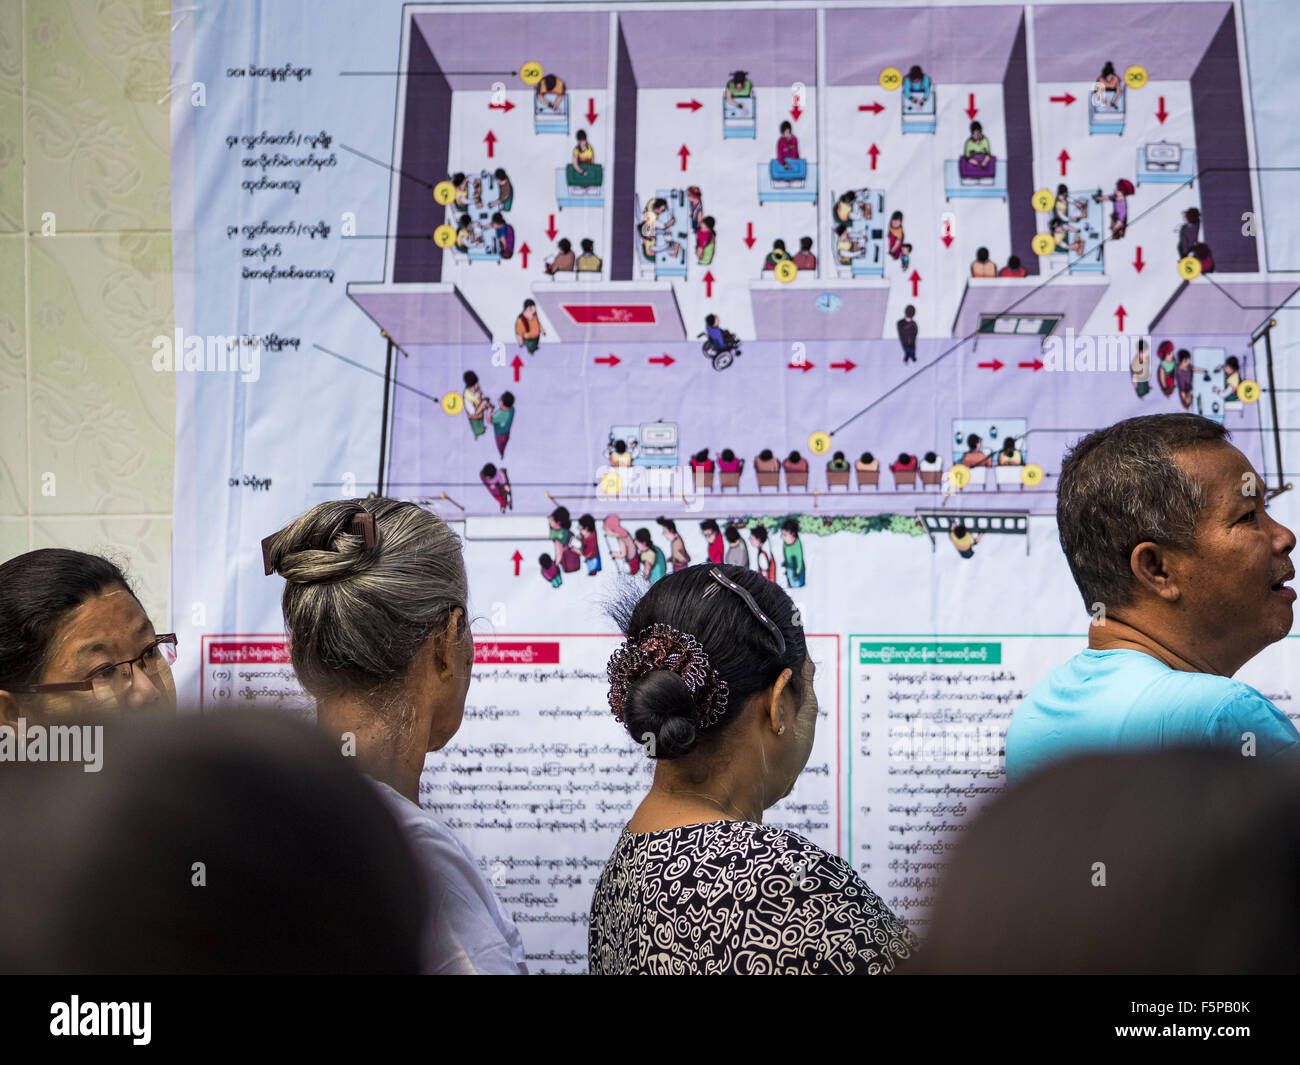 Yangon, Yangon Division, Myanmar. 8th Nov, 2015. People stand in line to get into their polling place in North Okkalapa, a township outside of central Yangon. A schematic drawing of the voting process is on the wall behind them. The citizens of Myanmar went to the polls Sunday to vote in the most democratic elections since 1990. The National League for Democracy, (NLD) the party of Aung San Suu Kyi is widely expected to get the most votes in the election, but it is not certain if they will get enough votes to secure an outright victory. The polls opened at 6AM. © ZUMA Press, Inc./Alamy Stock Photo